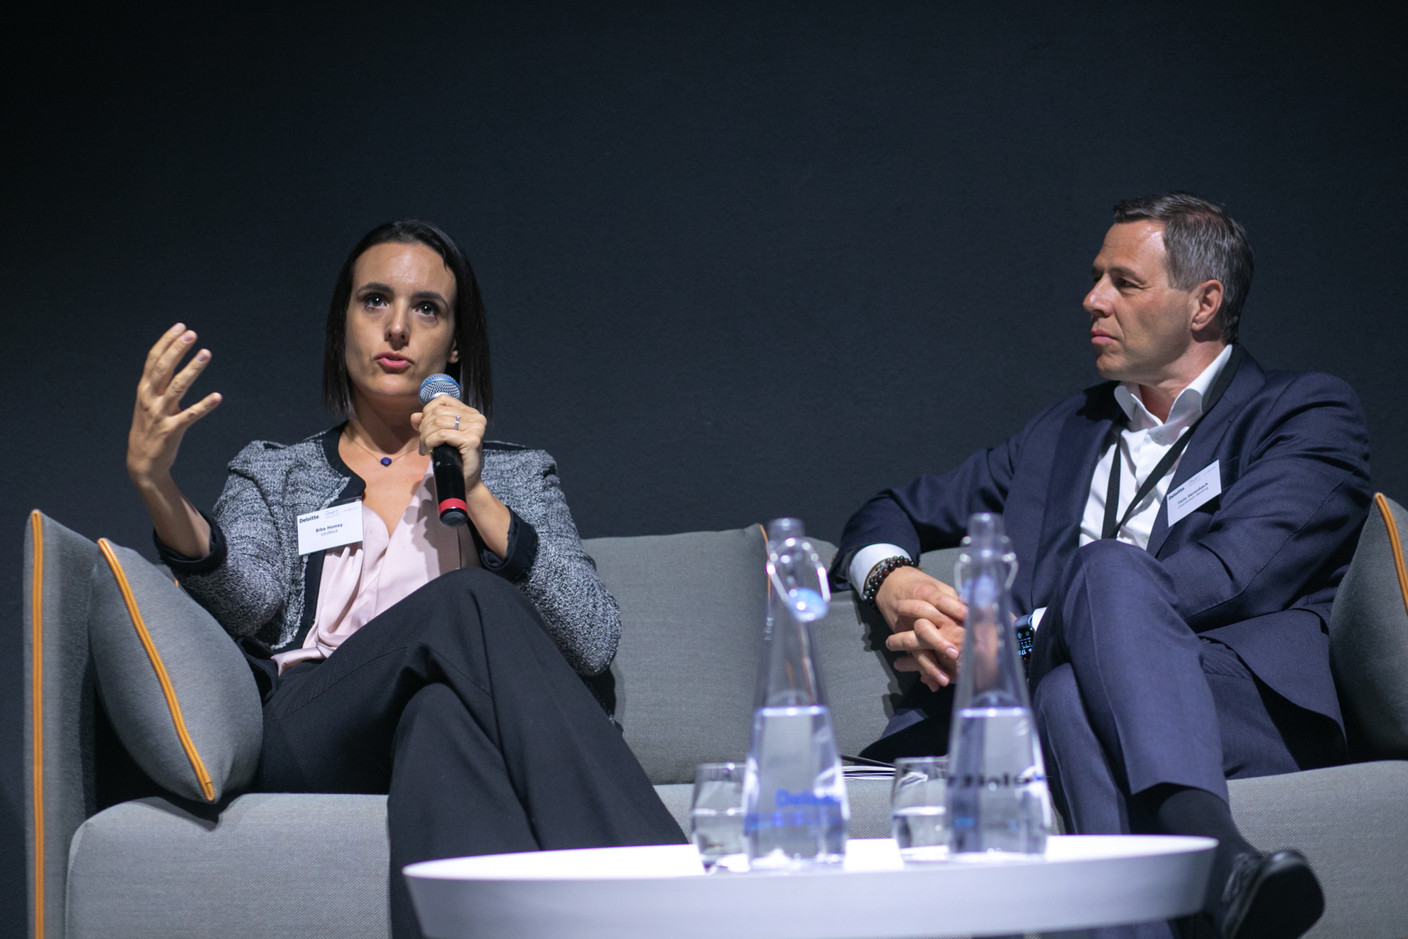 Biba Homsy of Homsy Legal and Thilo Derenbach of Clearstream seen on the “Digital Assets: What lies ahead of us within European securities landscape?” panel discussion at Deloitte’s digital assets conference, 20 April 2023. Photo: Matic Zorman / Maison Moderne